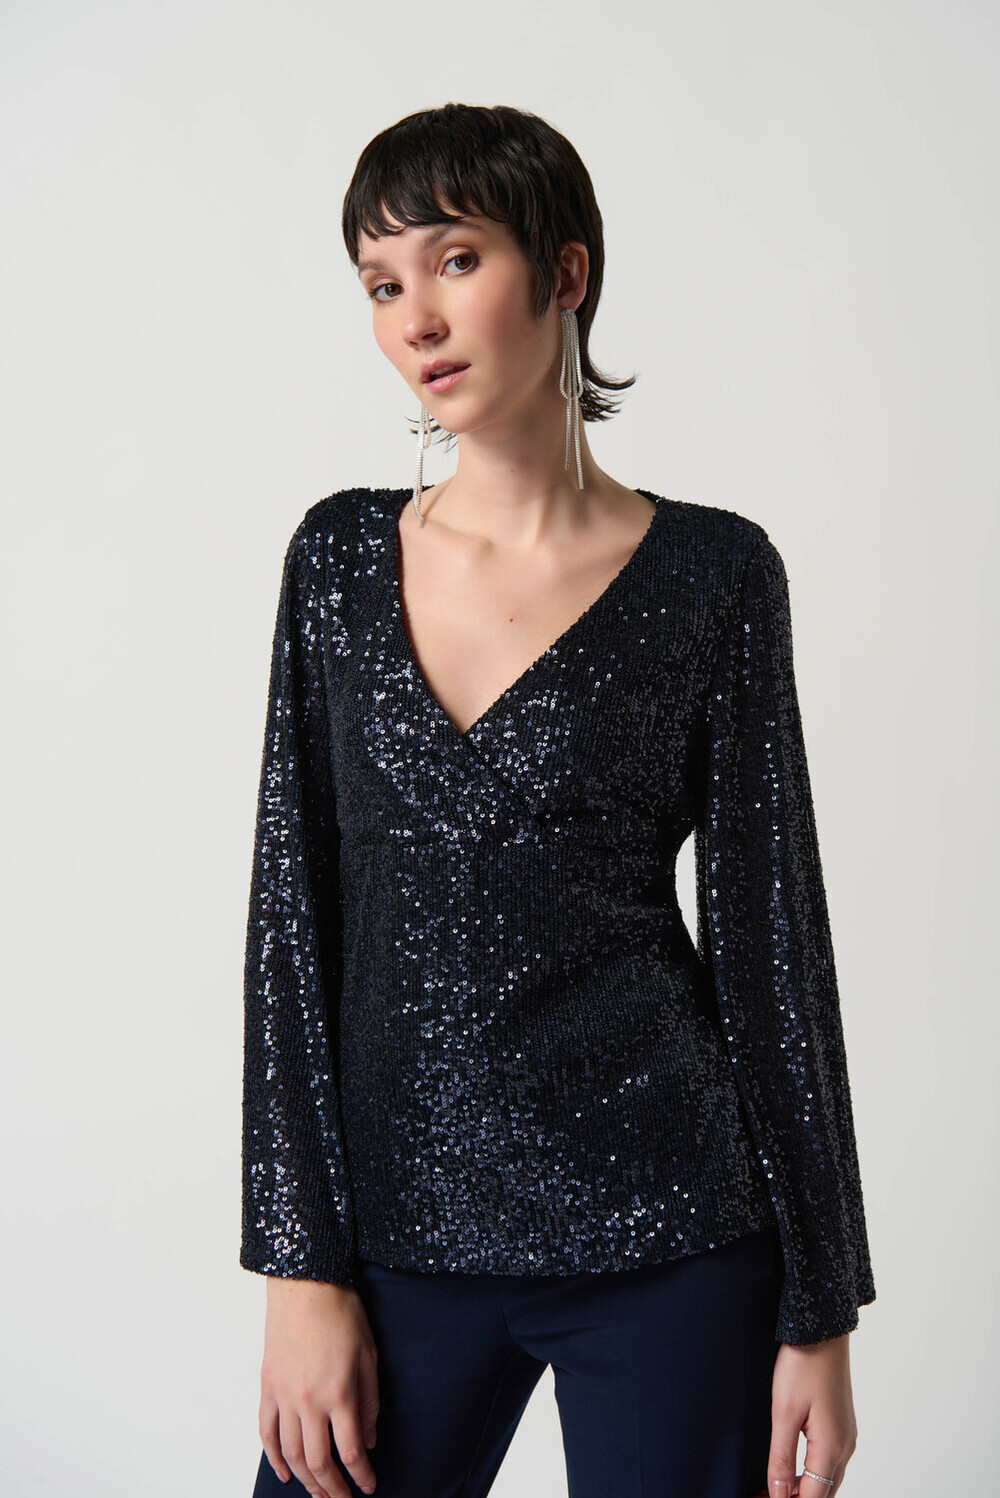 All-Over Sequin Top Style 234231. Black/black